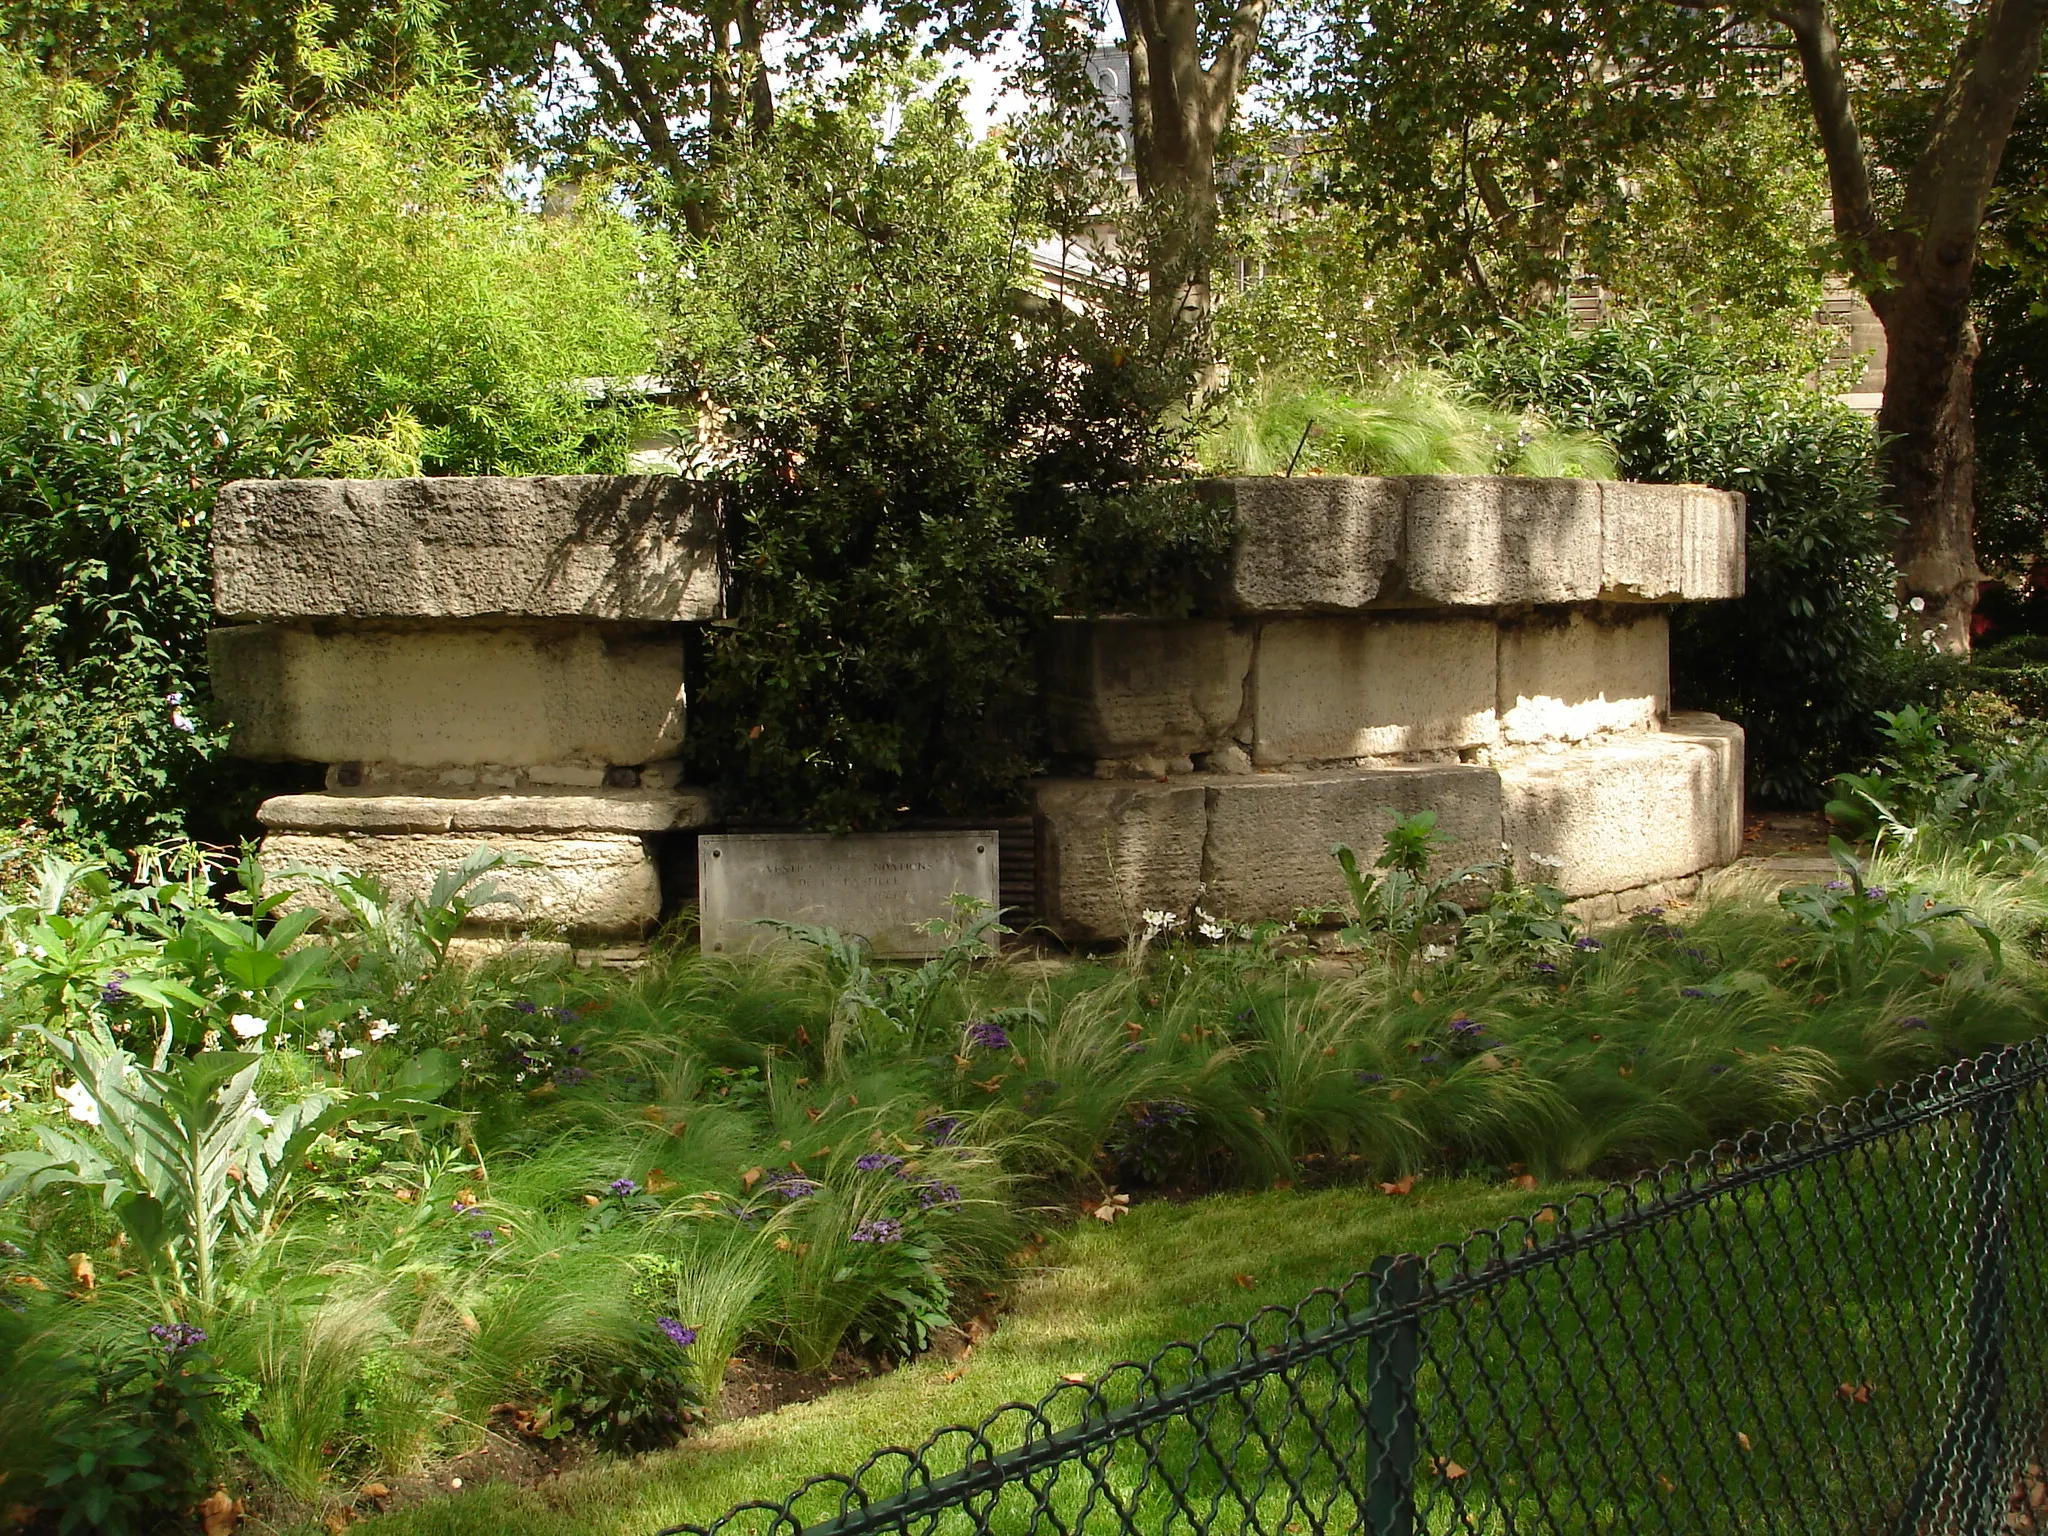 Photo showing: Boulevard Henri IV - Vestige of the foundation of the Bastille. The translation of the text on the plaque is : "Vestiges of the foundations of the Bastille Liberty tower discovered in 1899 and carried to this place